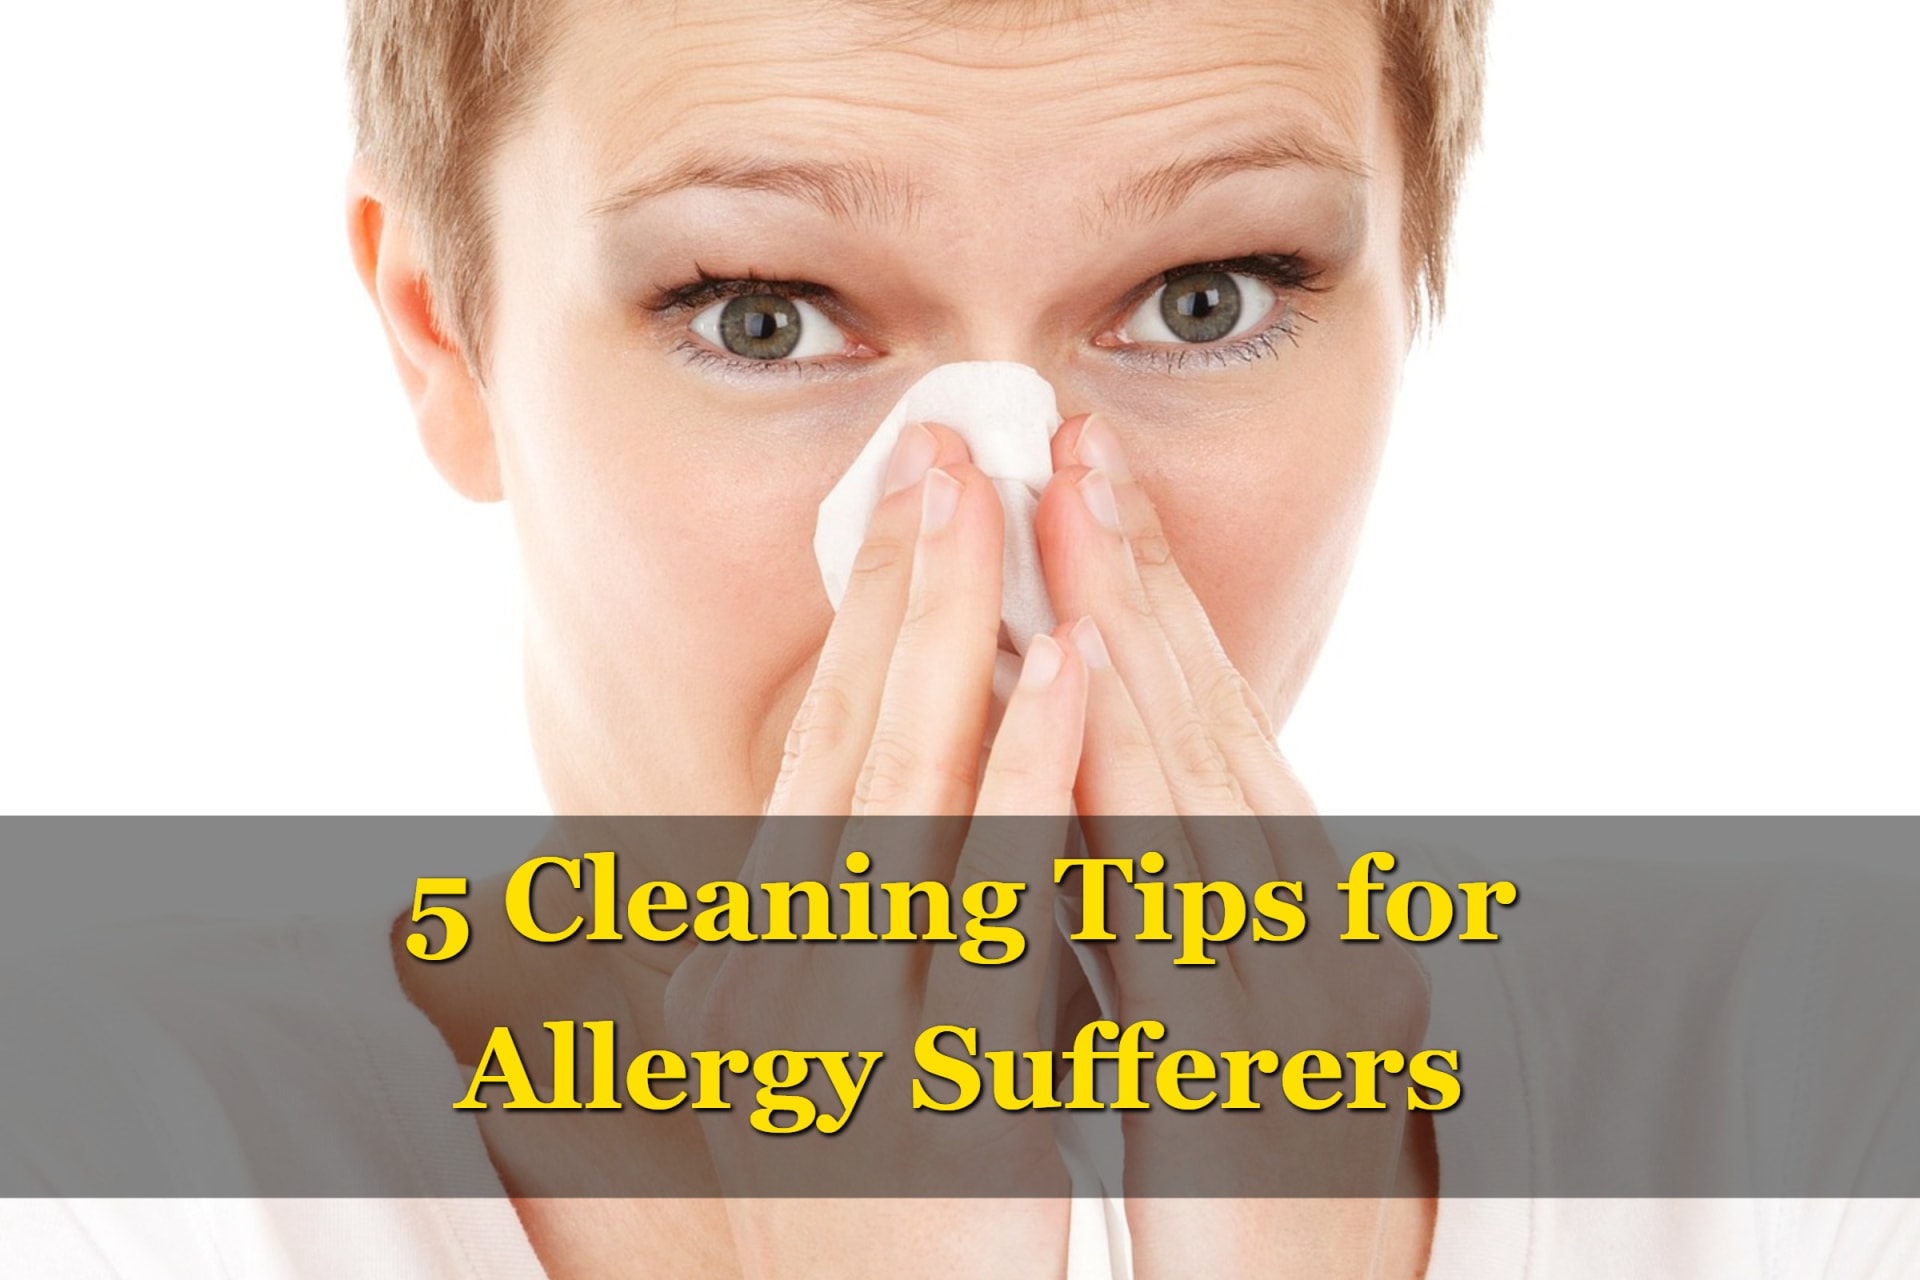 5 Tips for Allergy Sufferers